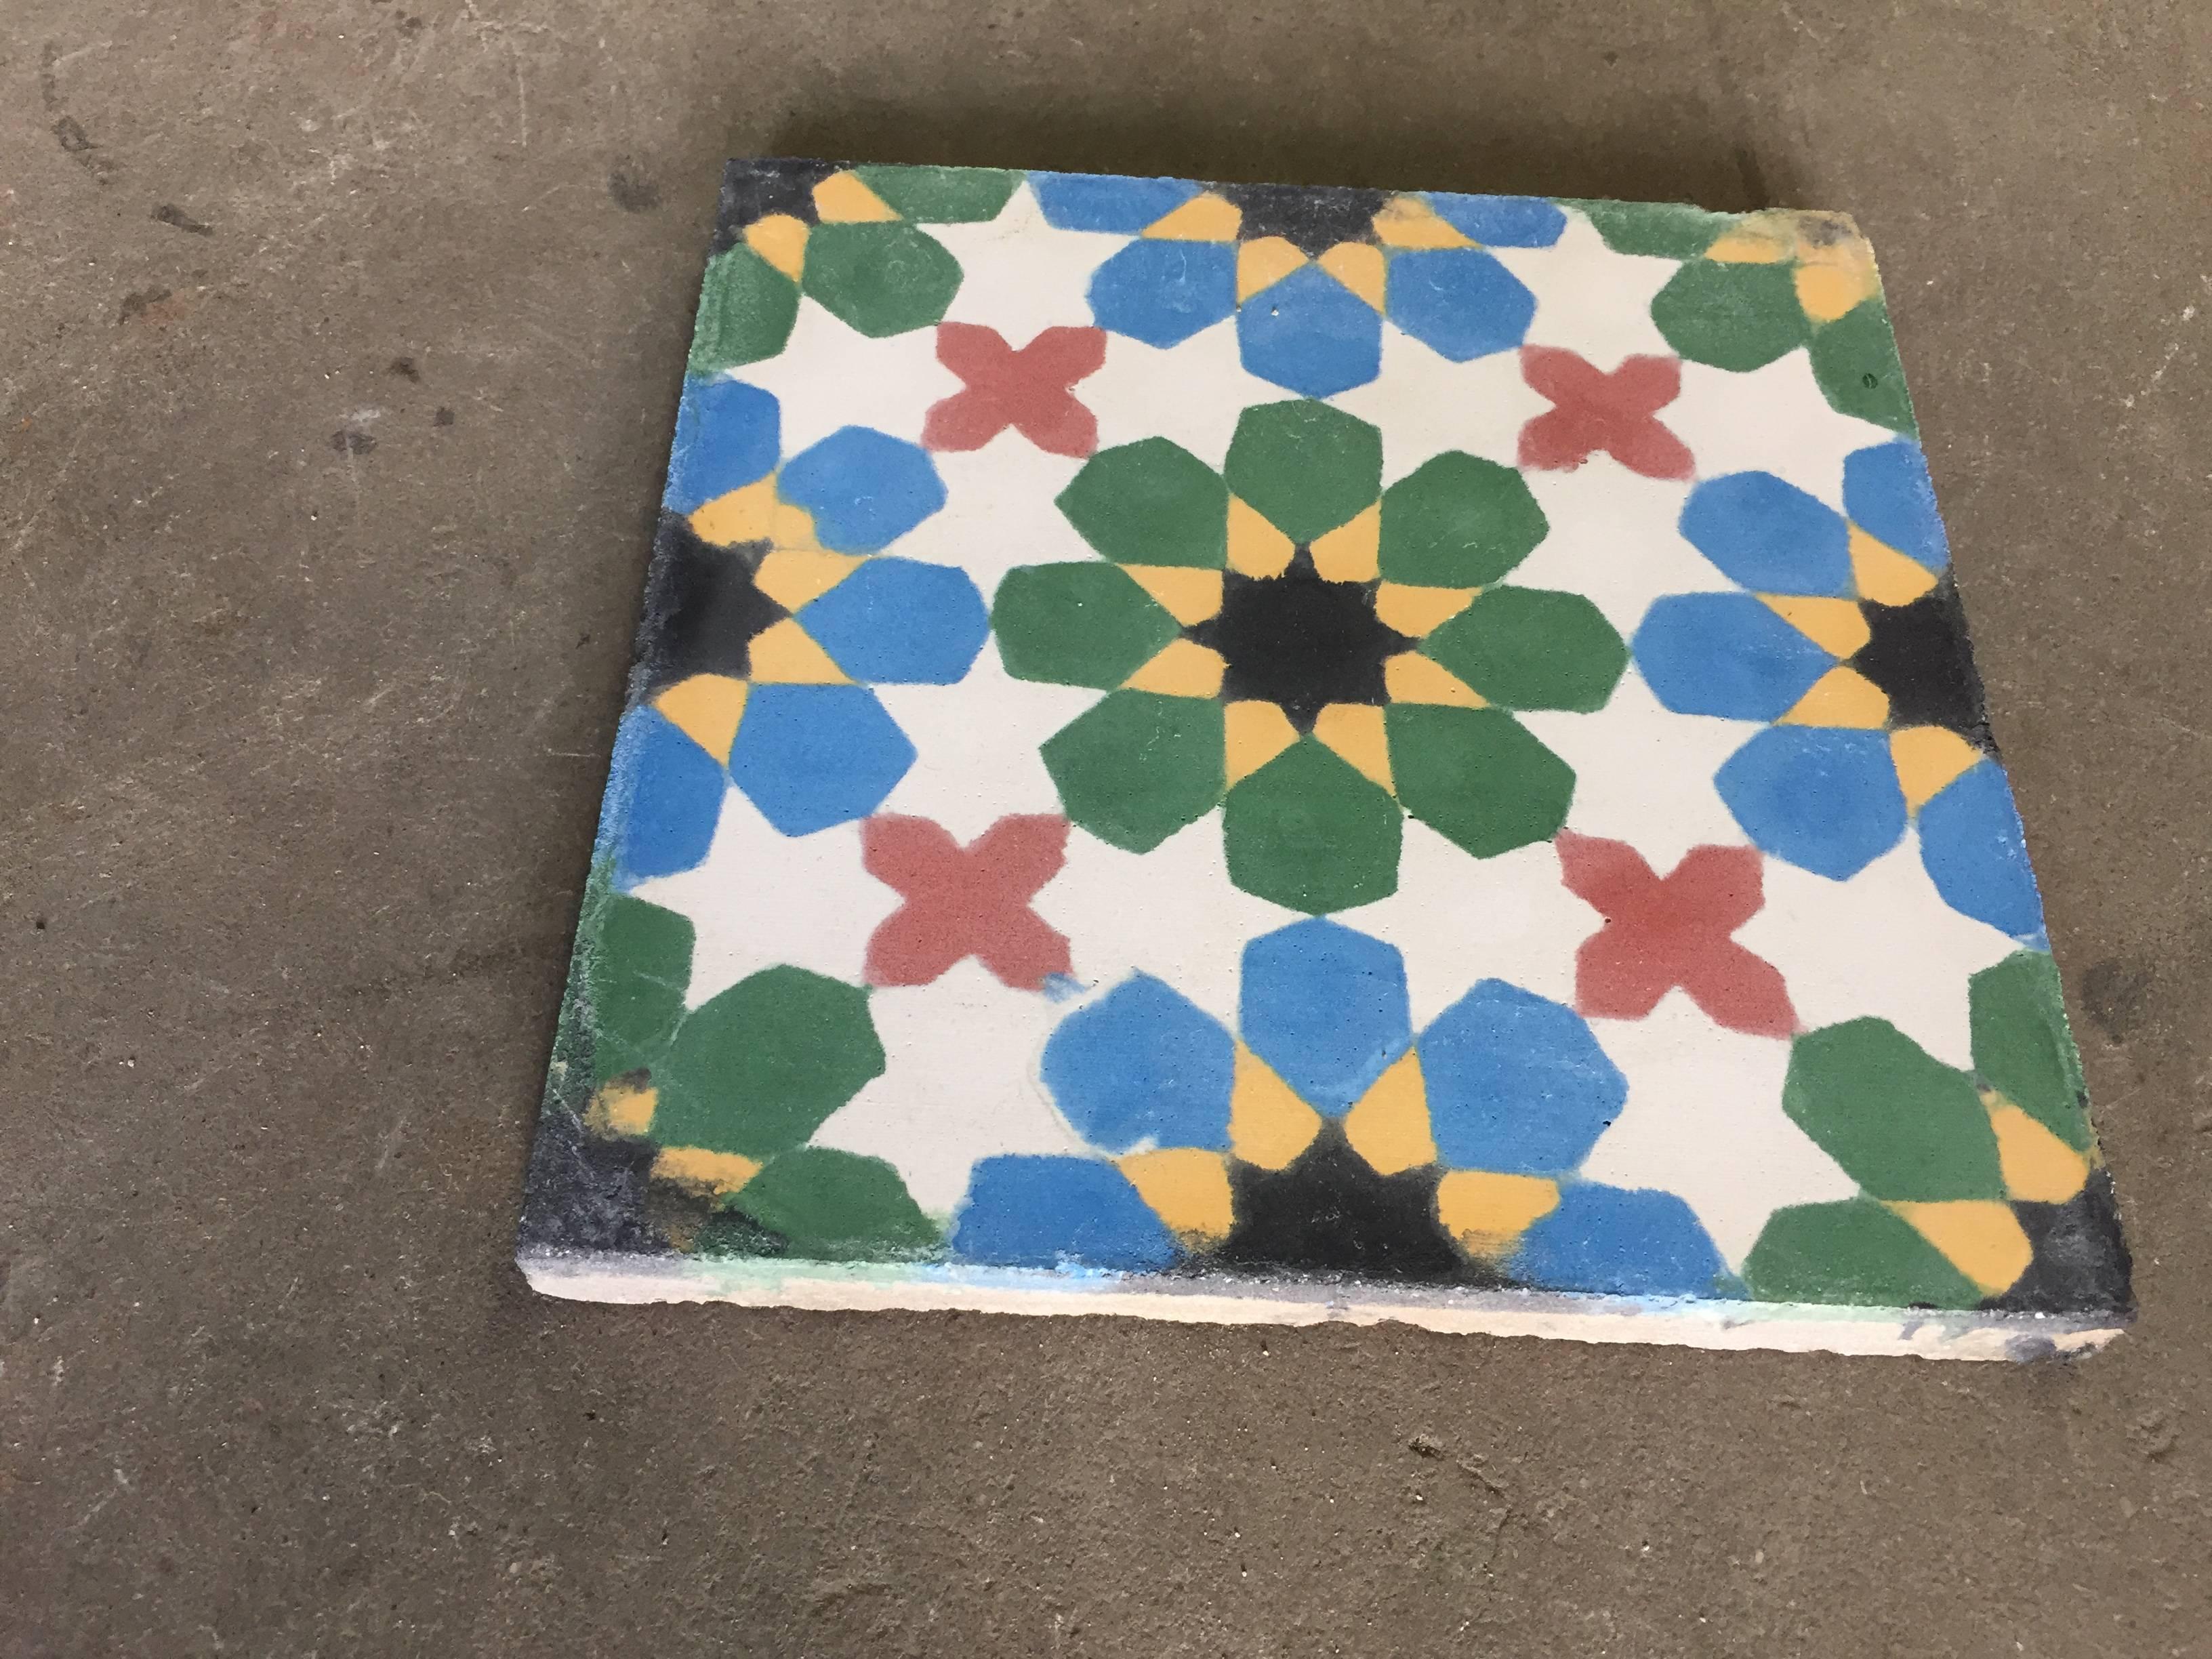 Moroccan Hand-Crafted encaustic Cement Tile with Traditional Fez Moorish Design 10